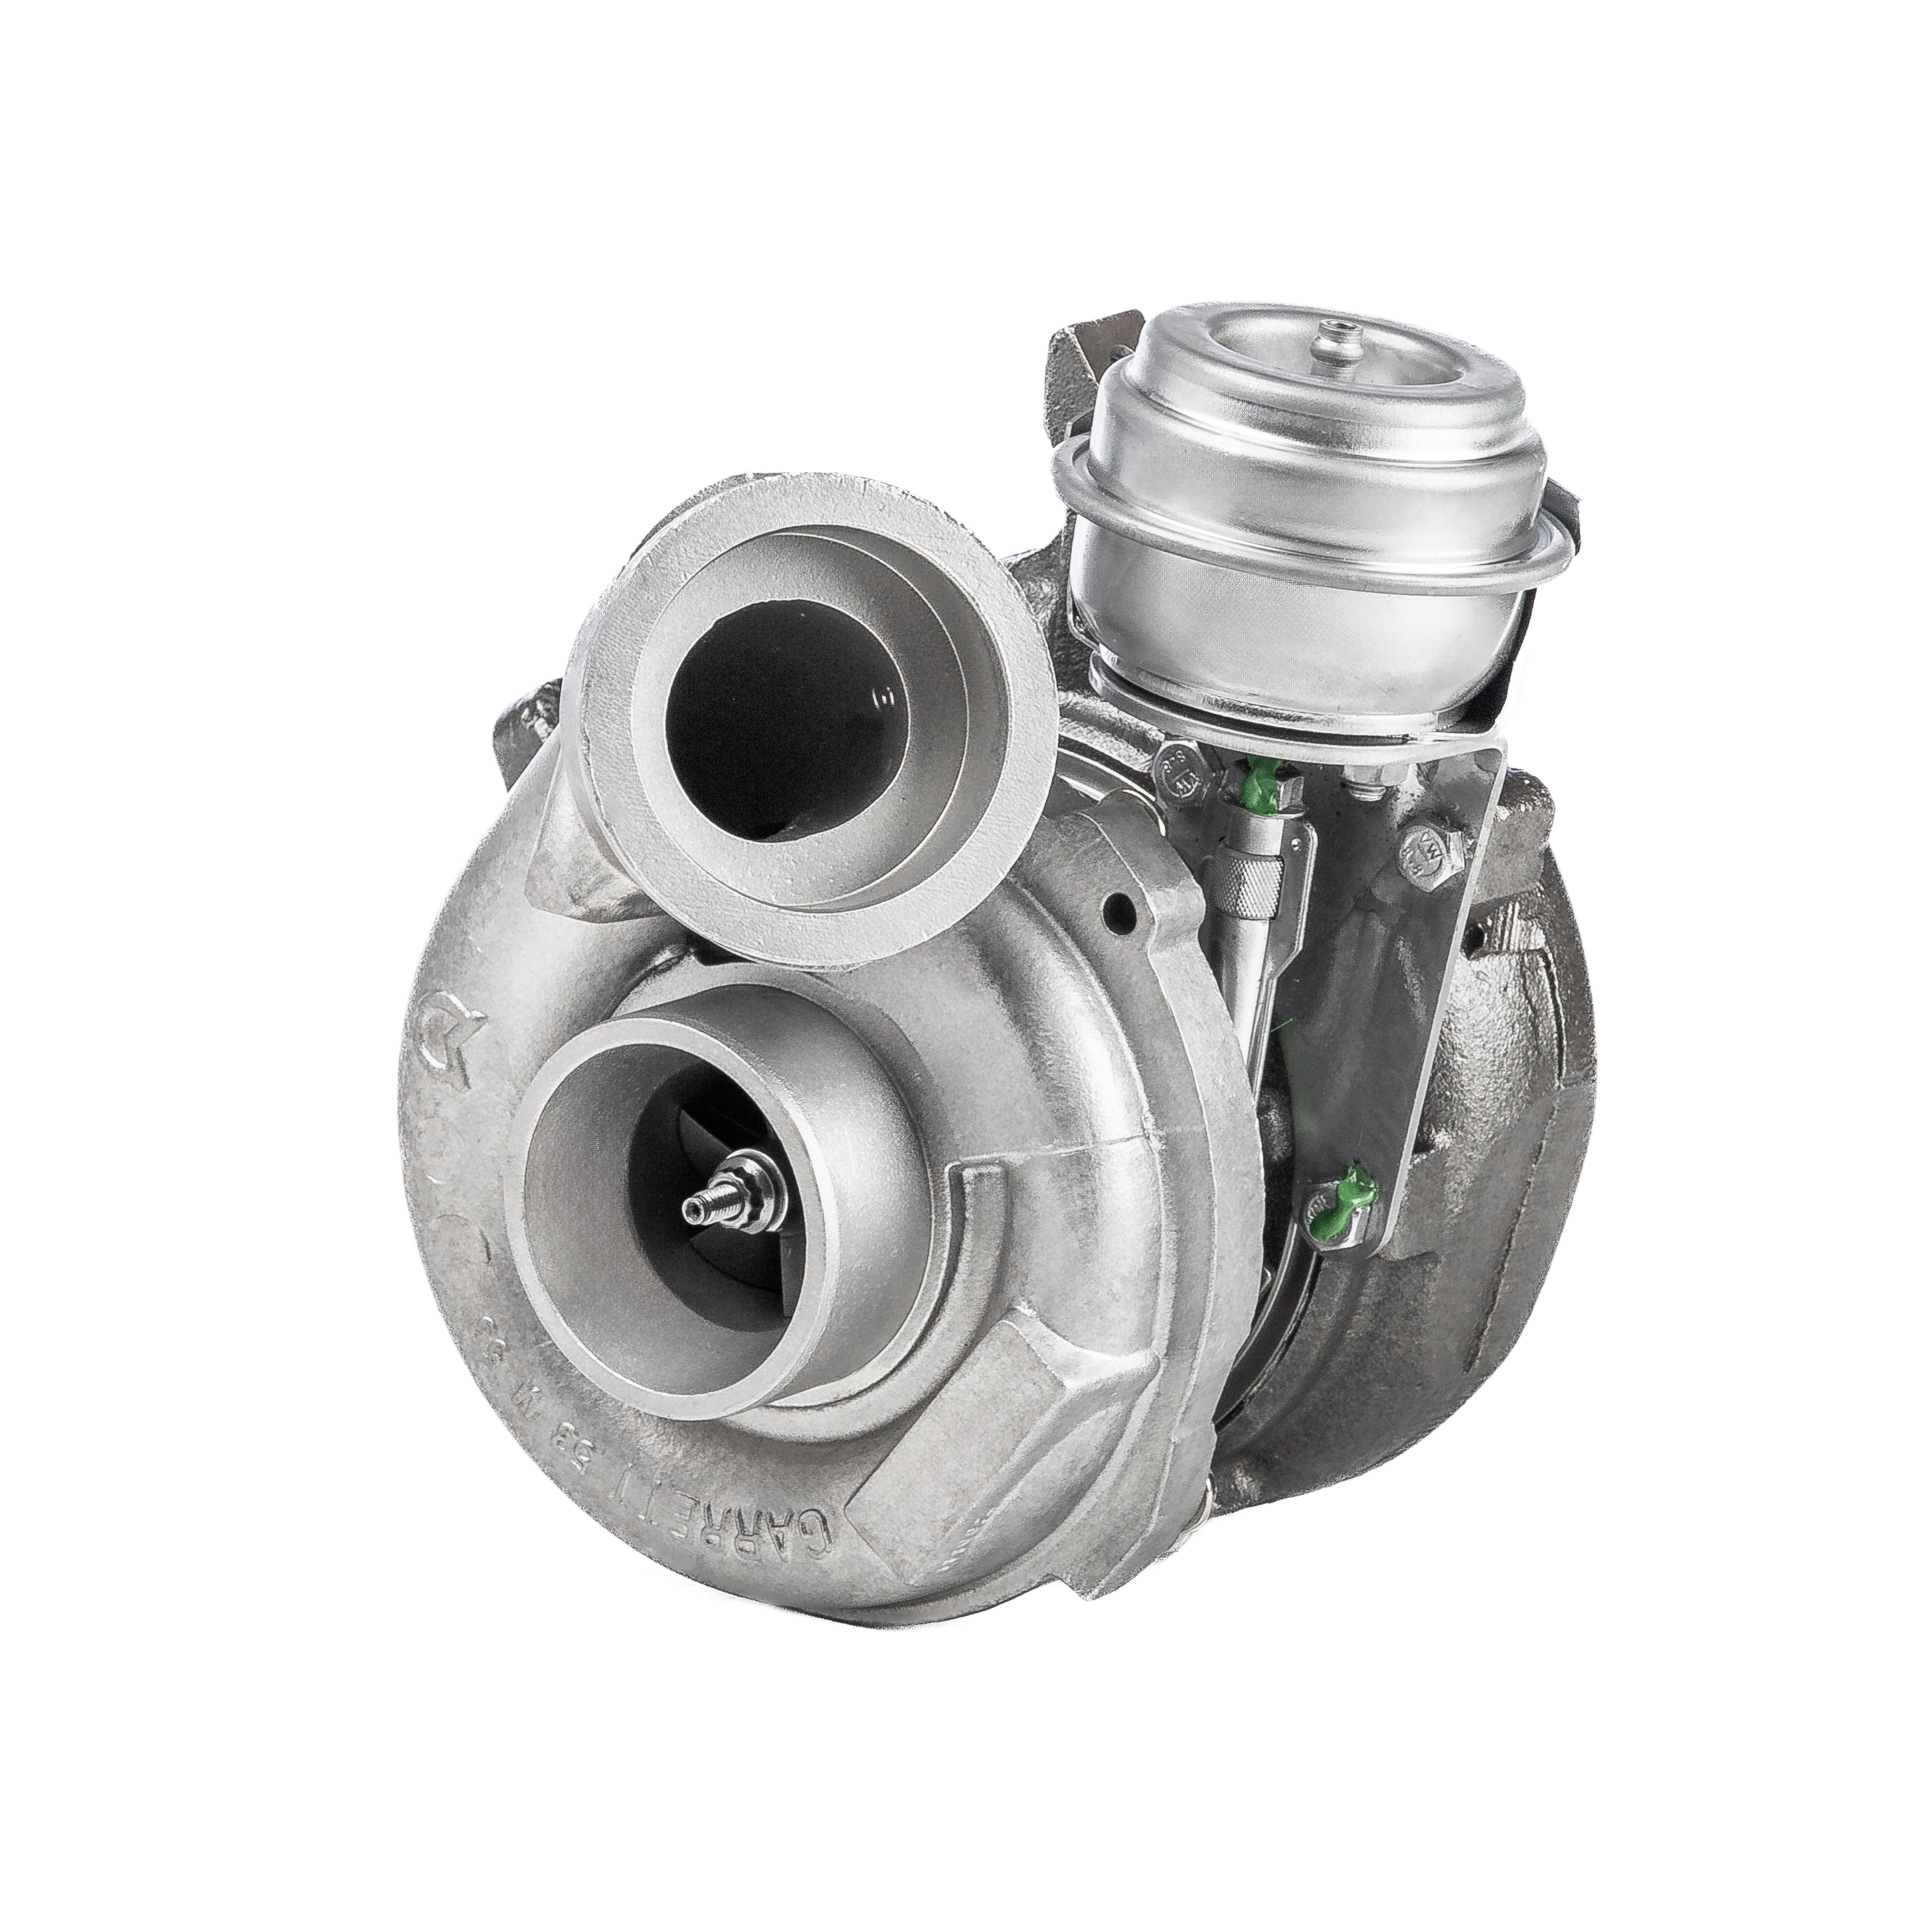 BR Turbo 709838-5001RS Turbocharger 612 096 03 99 80